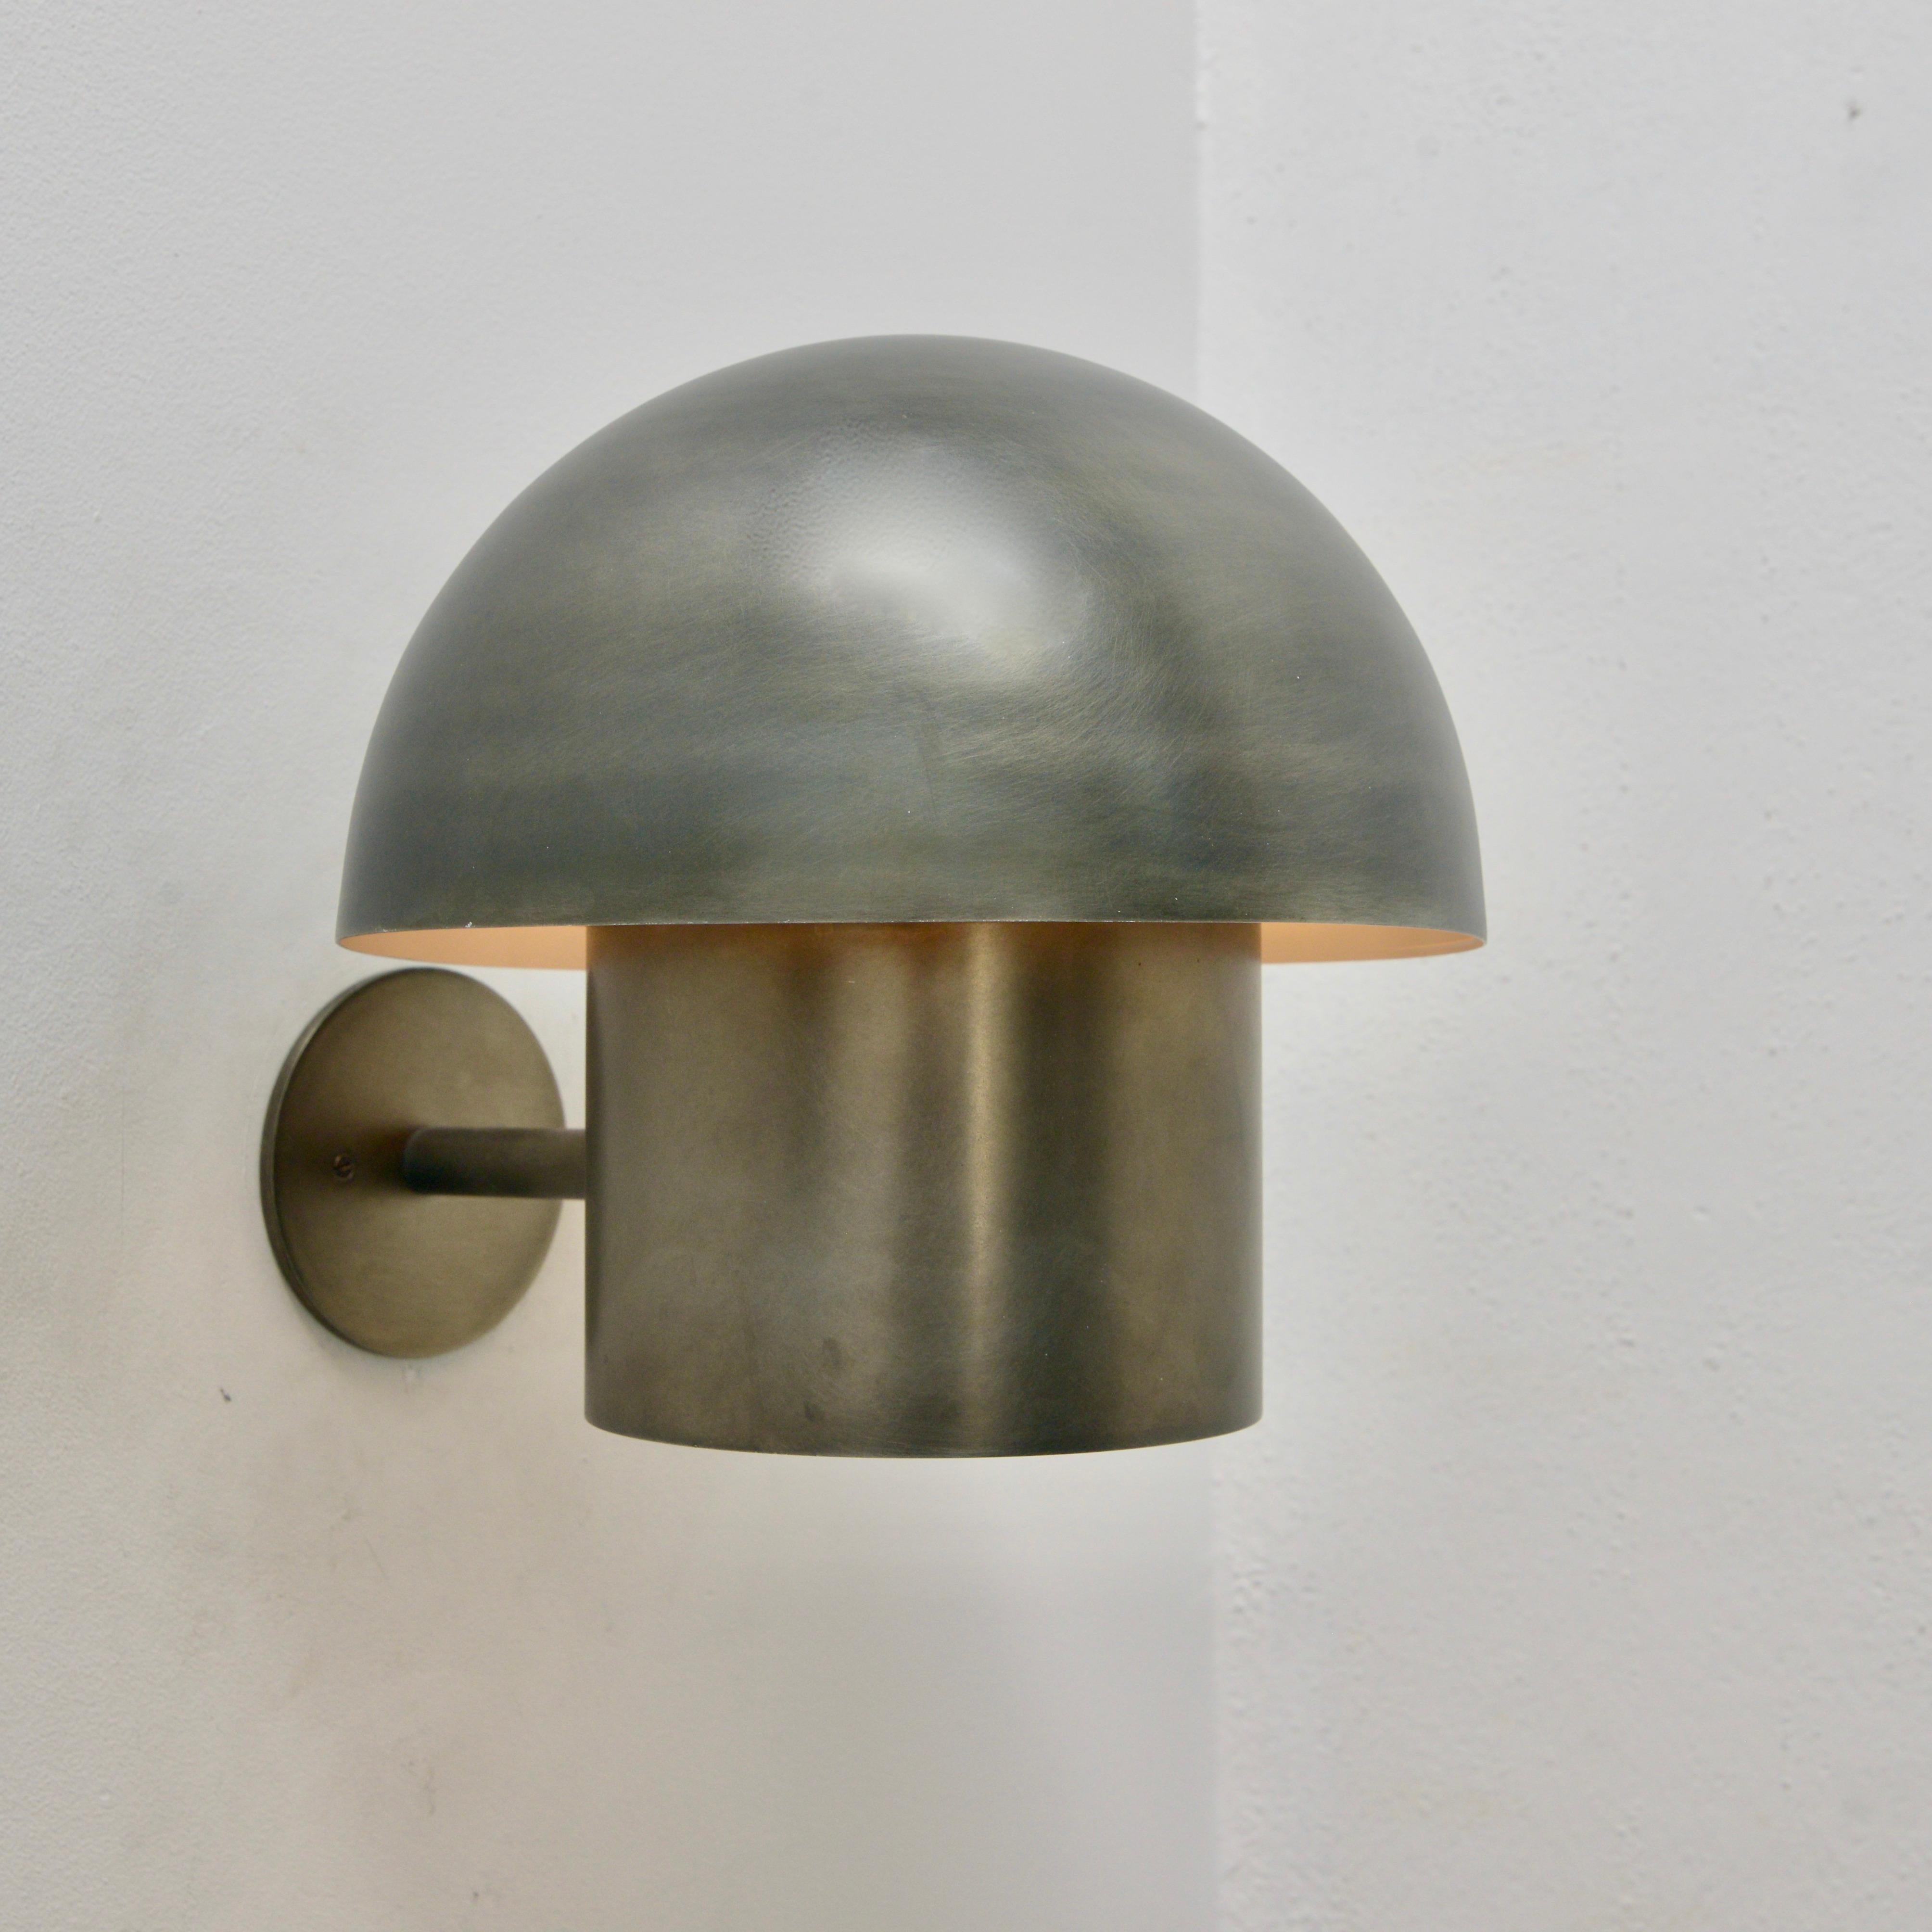 Handsome Zinc Outdoor Sconce in a Classic Mid-Century Modern Scandinavian design. Crafted from zinc plated steel, clear sealed. Wired with a single E26 medium based socket. Light casts downward. Lightbulbs included with order. Priced individually.